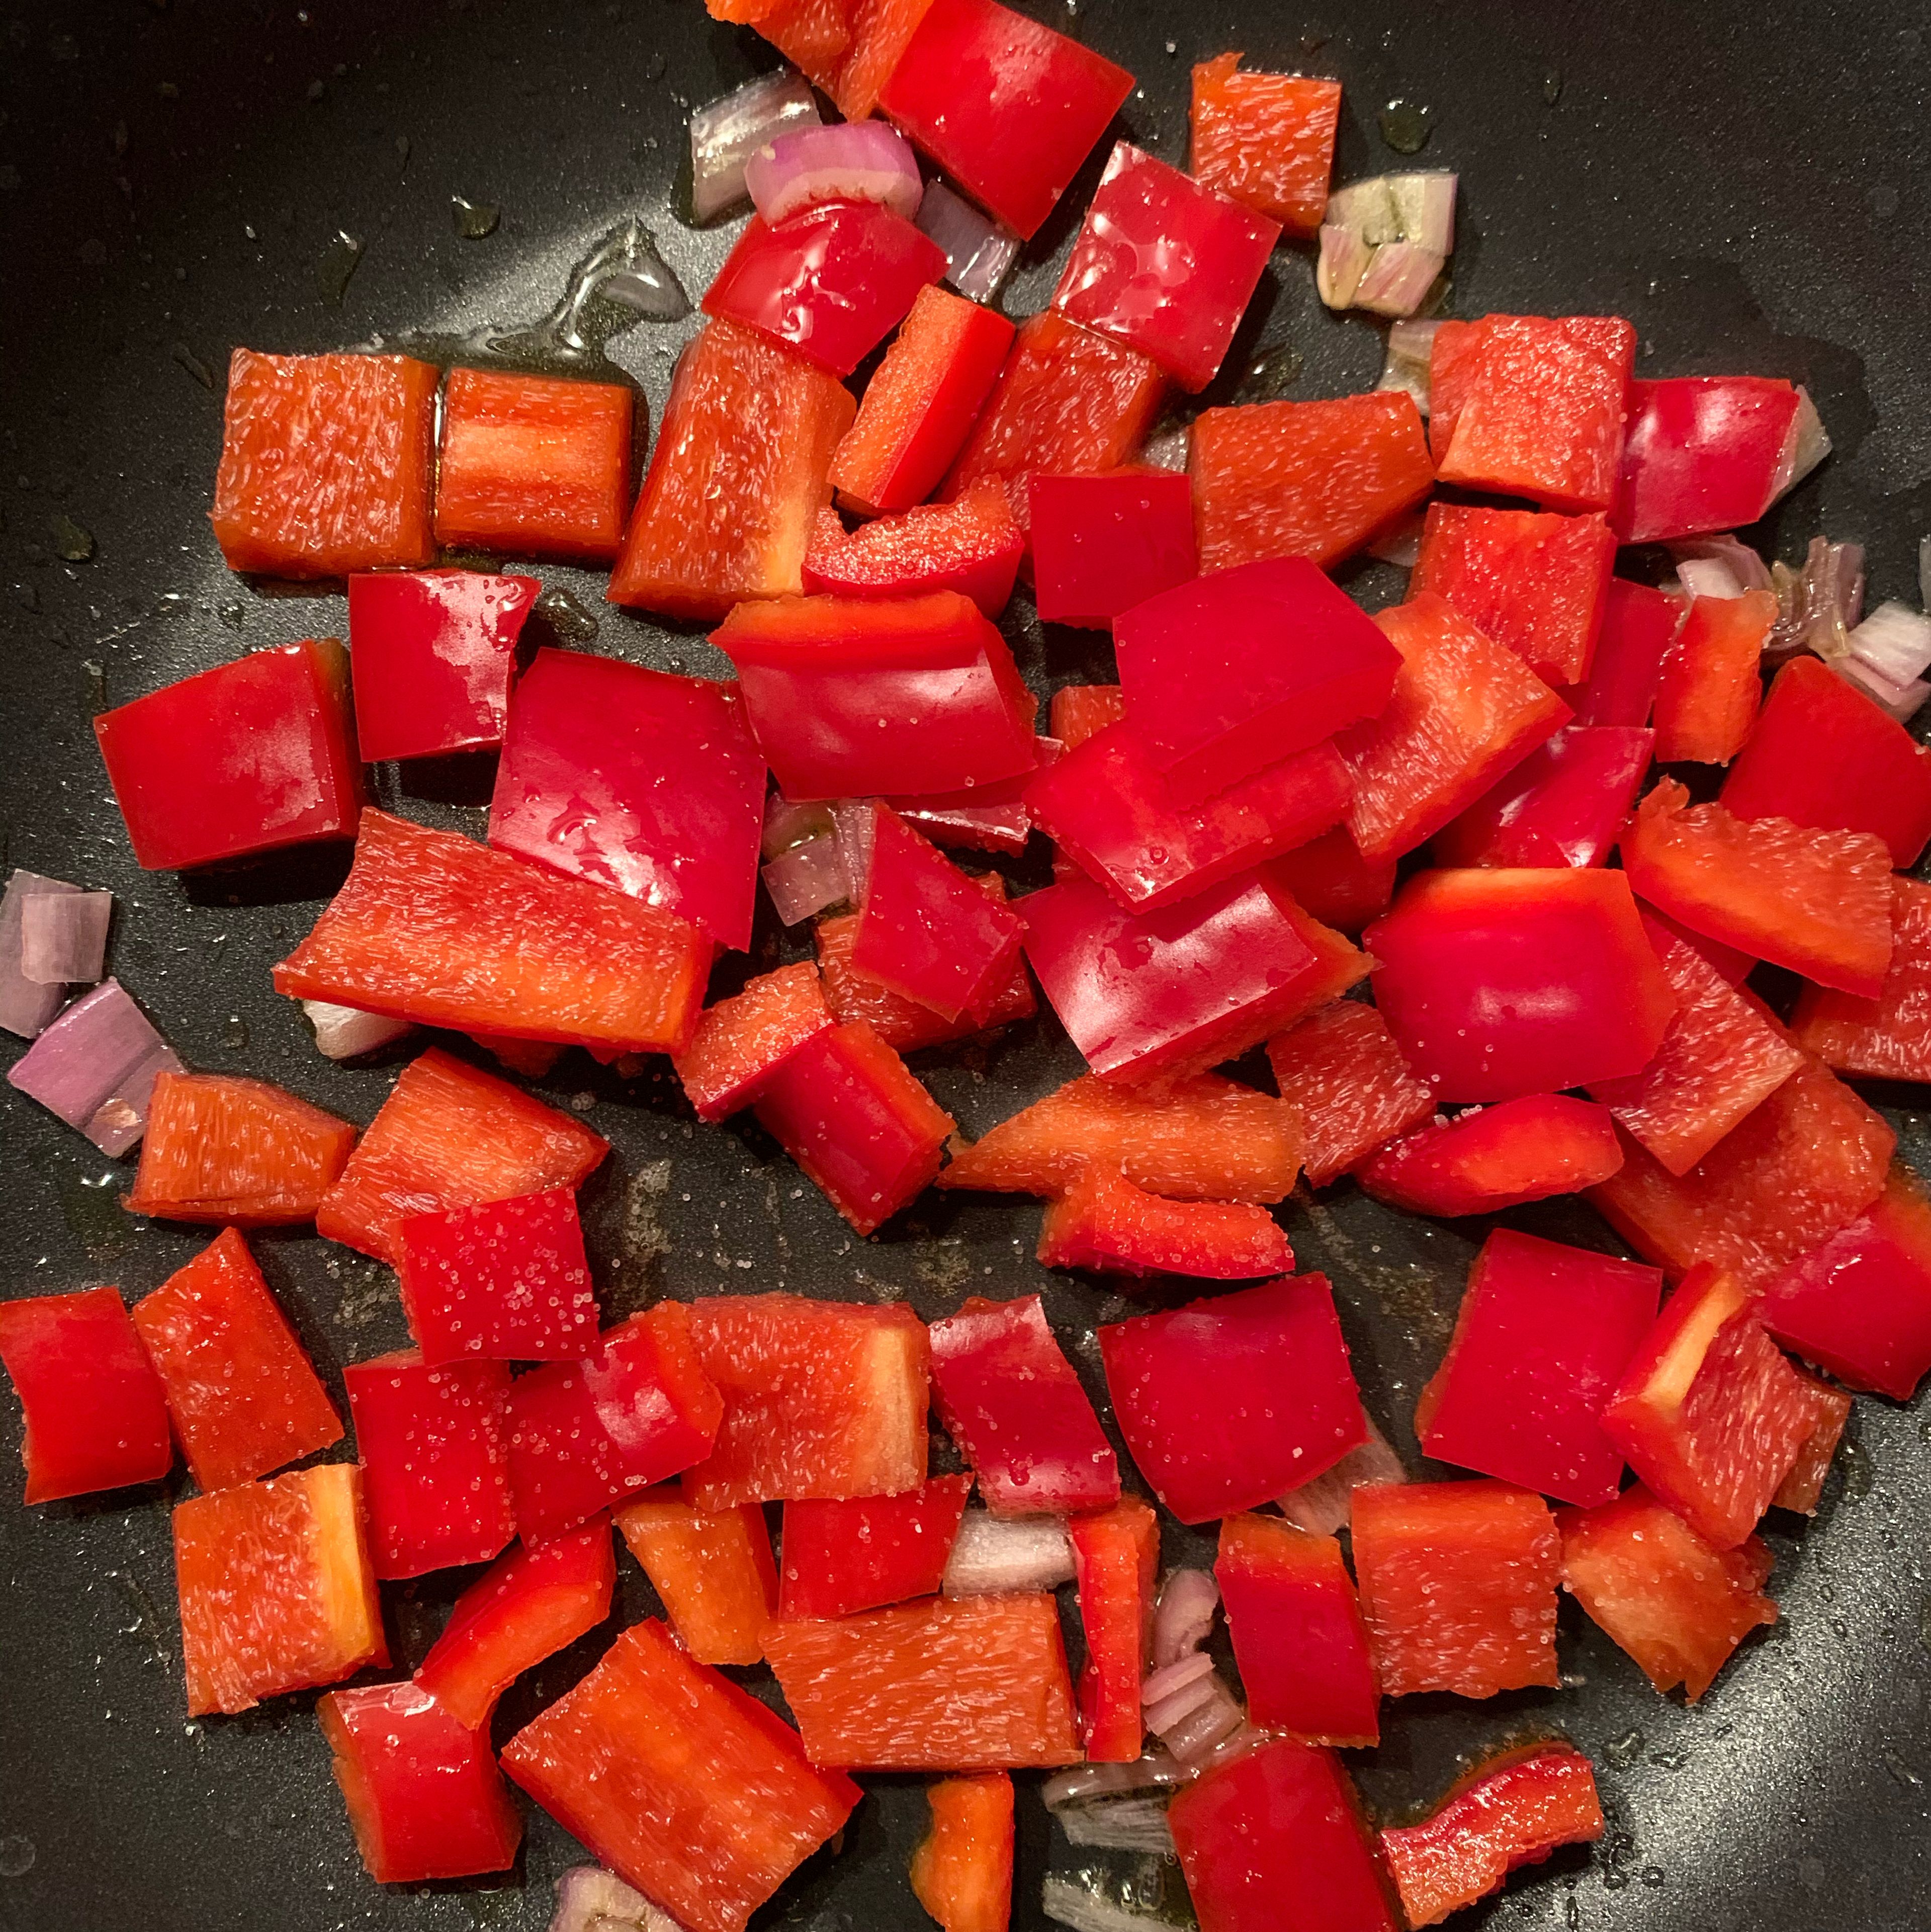 Add olive oil and onion to a frying pan. When golden, add the diced pepper and salt. Let cook for around 10 minutes.